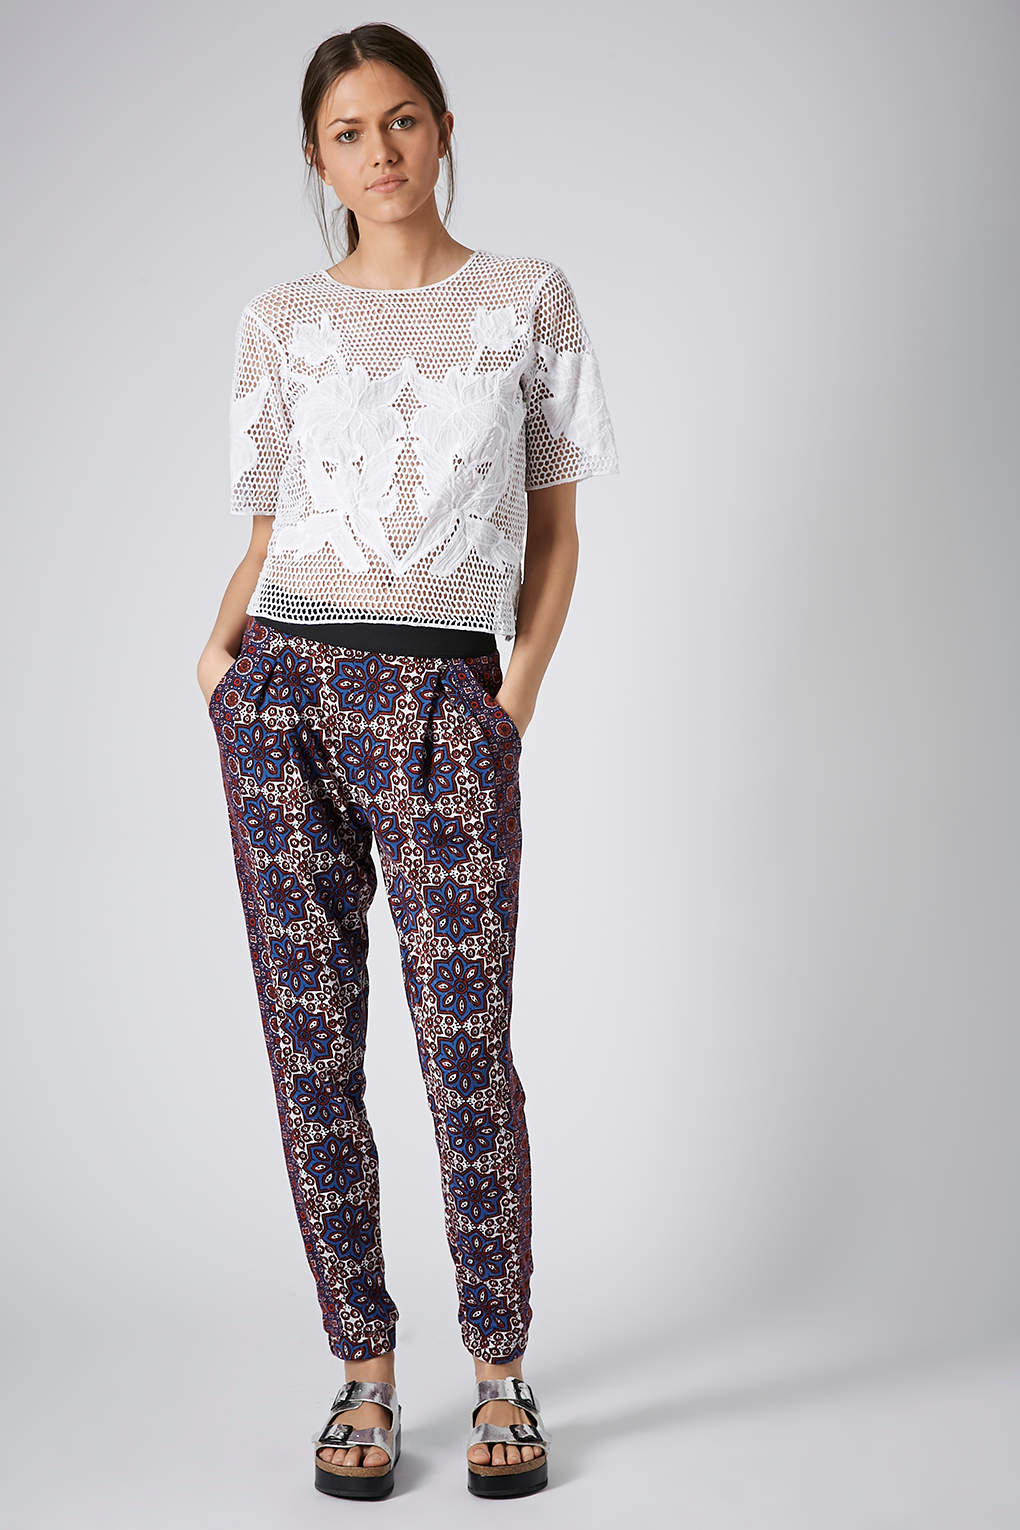 Lyst - Topshop Mixed Tile Print Jersey Tapered Trousers in Purple